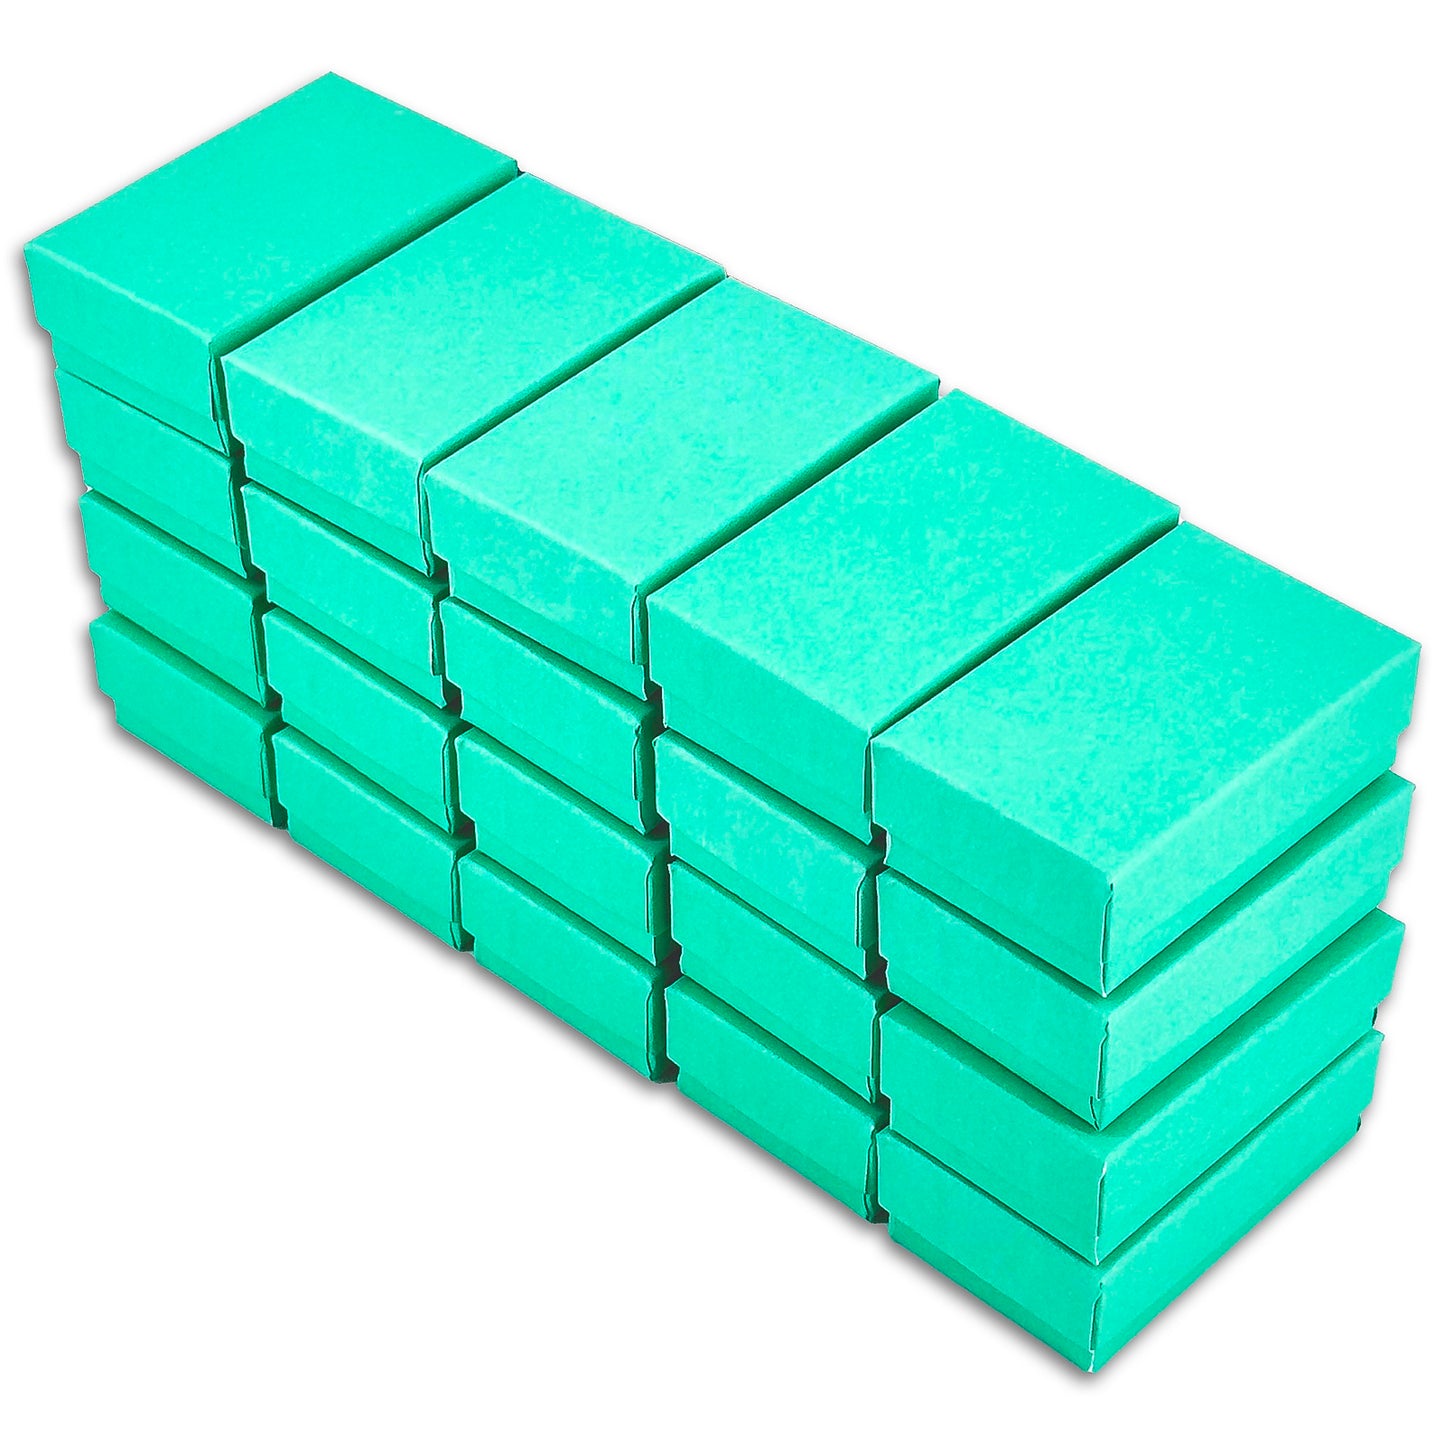 2 5/8" x 1 1/2" x 1" Teal Green Cotton Filled Paper Box